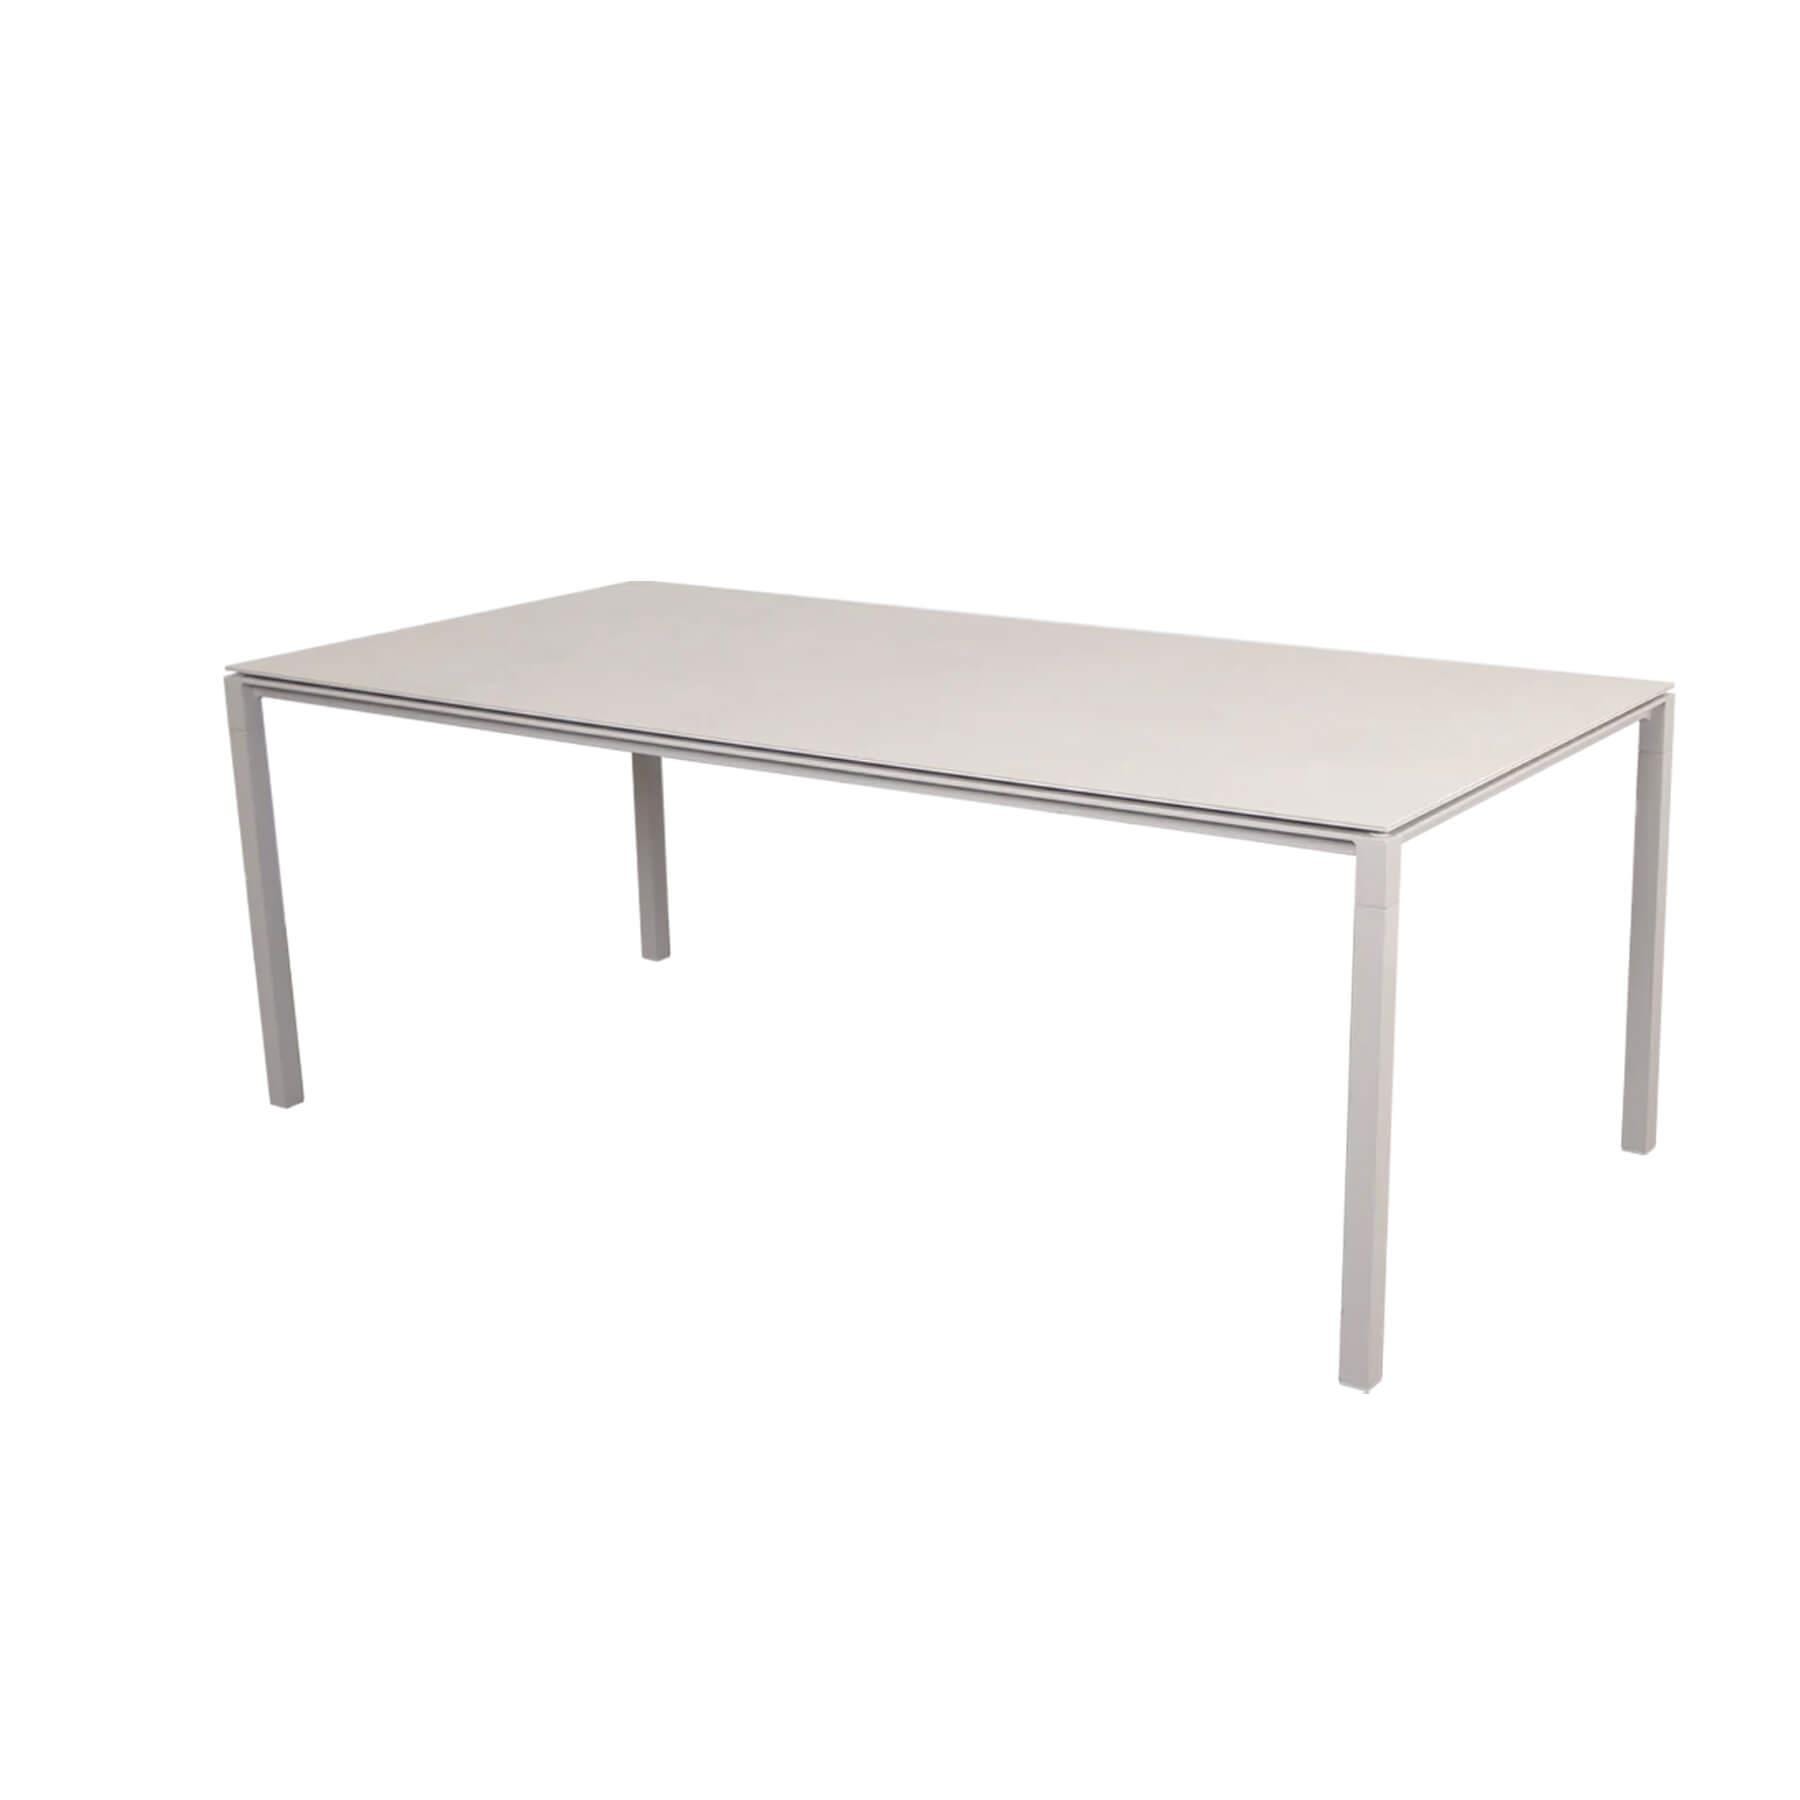 Caneline Pure Outdoor Dining Table Large Ceramic Toscana Sand Top Sand Legs Grey